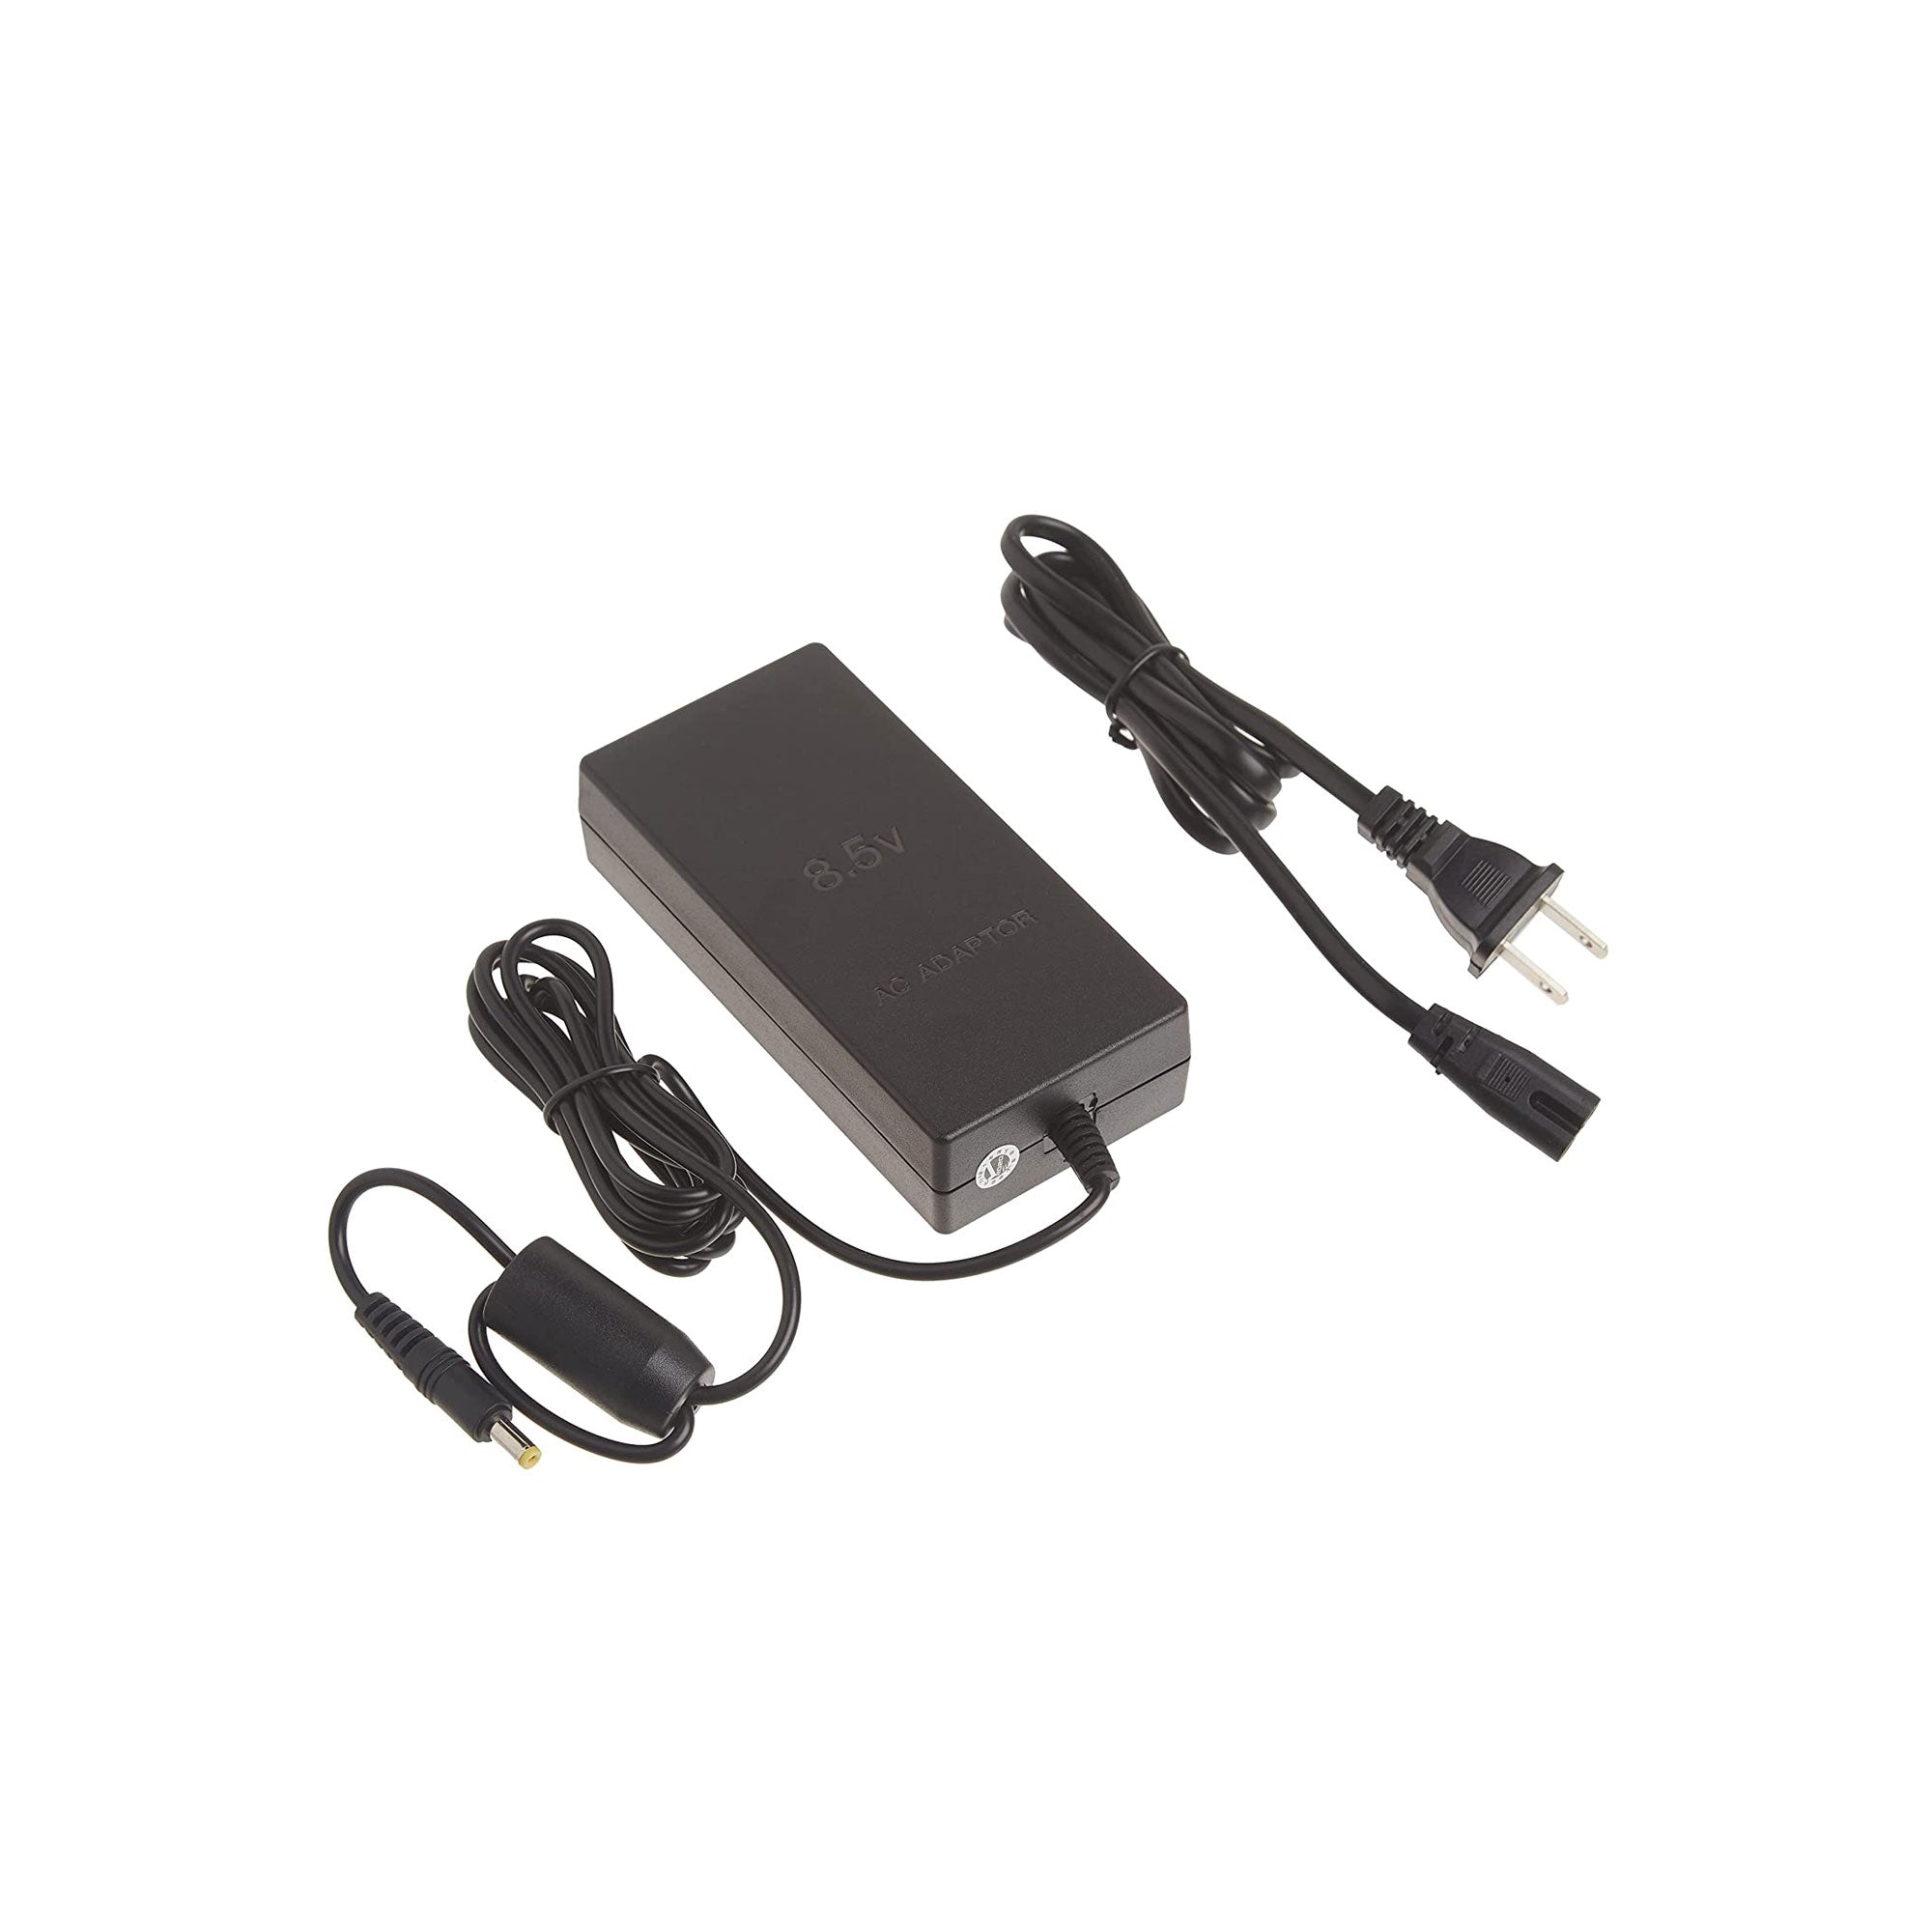 Power Cord Adapter for Sony PlayStation 2 Slim Console